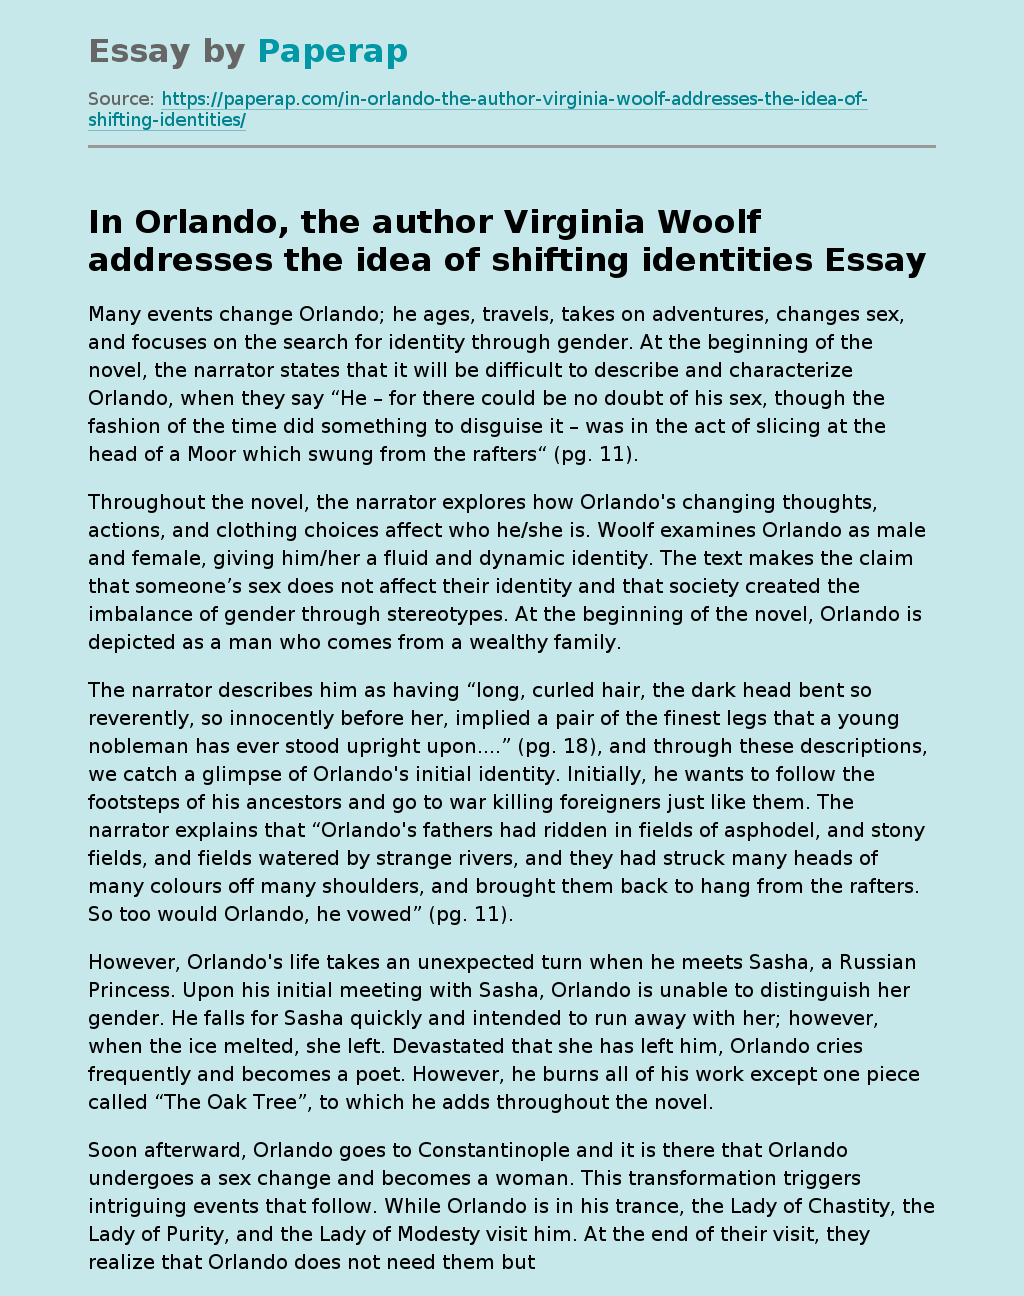 In Orlando, the author Virginia Woolf addresses the idea of shifting identities